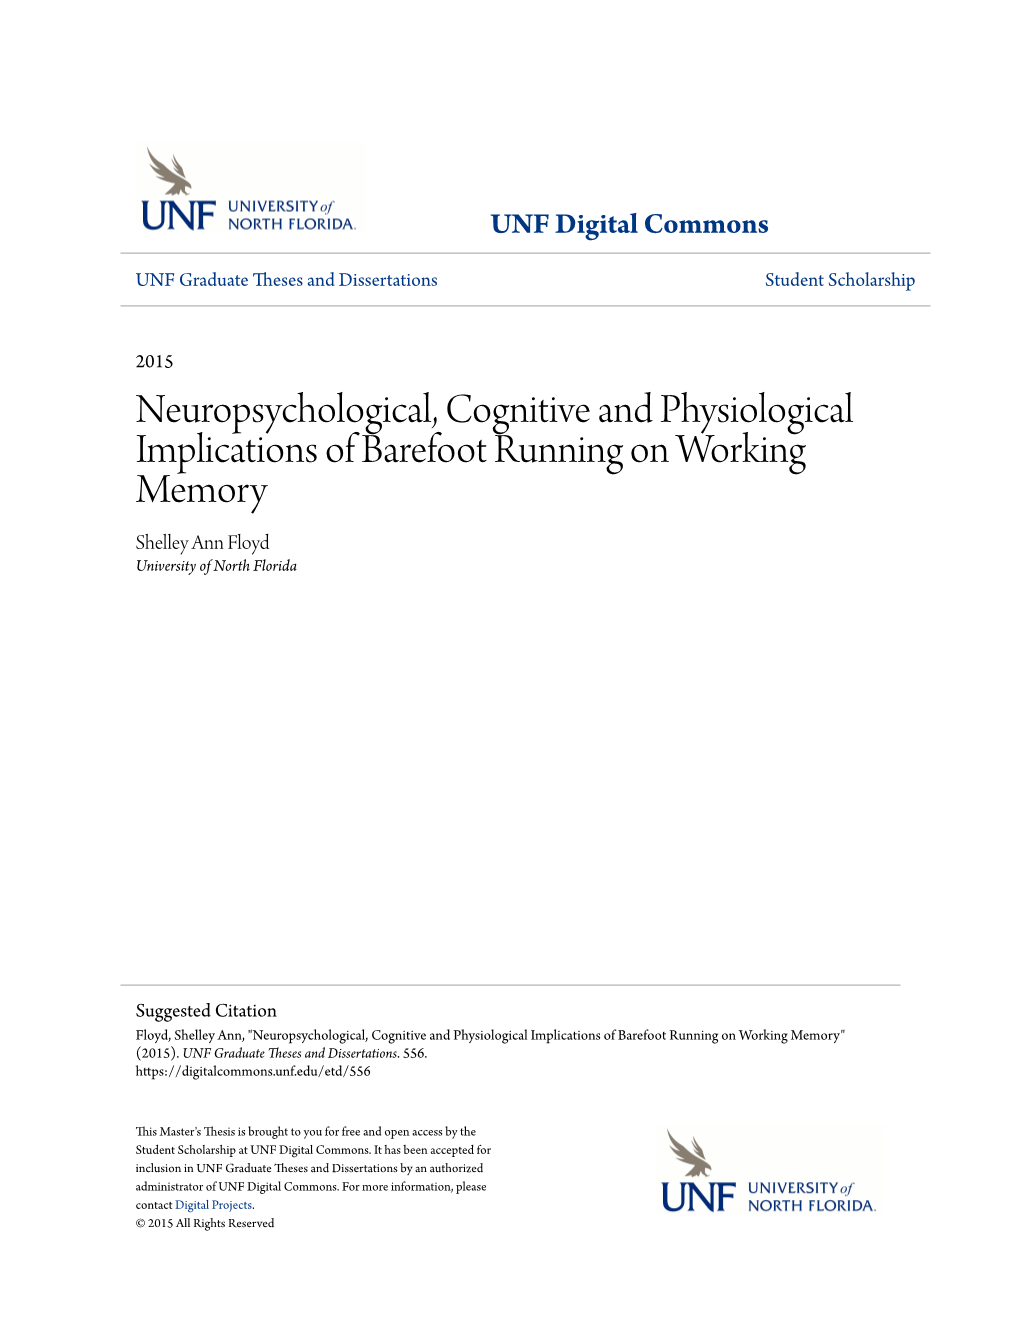 Neuropsychological, Cognitive and Physiological Implications of Barefoot Running on Working Memory Shelley Ann Floyd University of North Florida